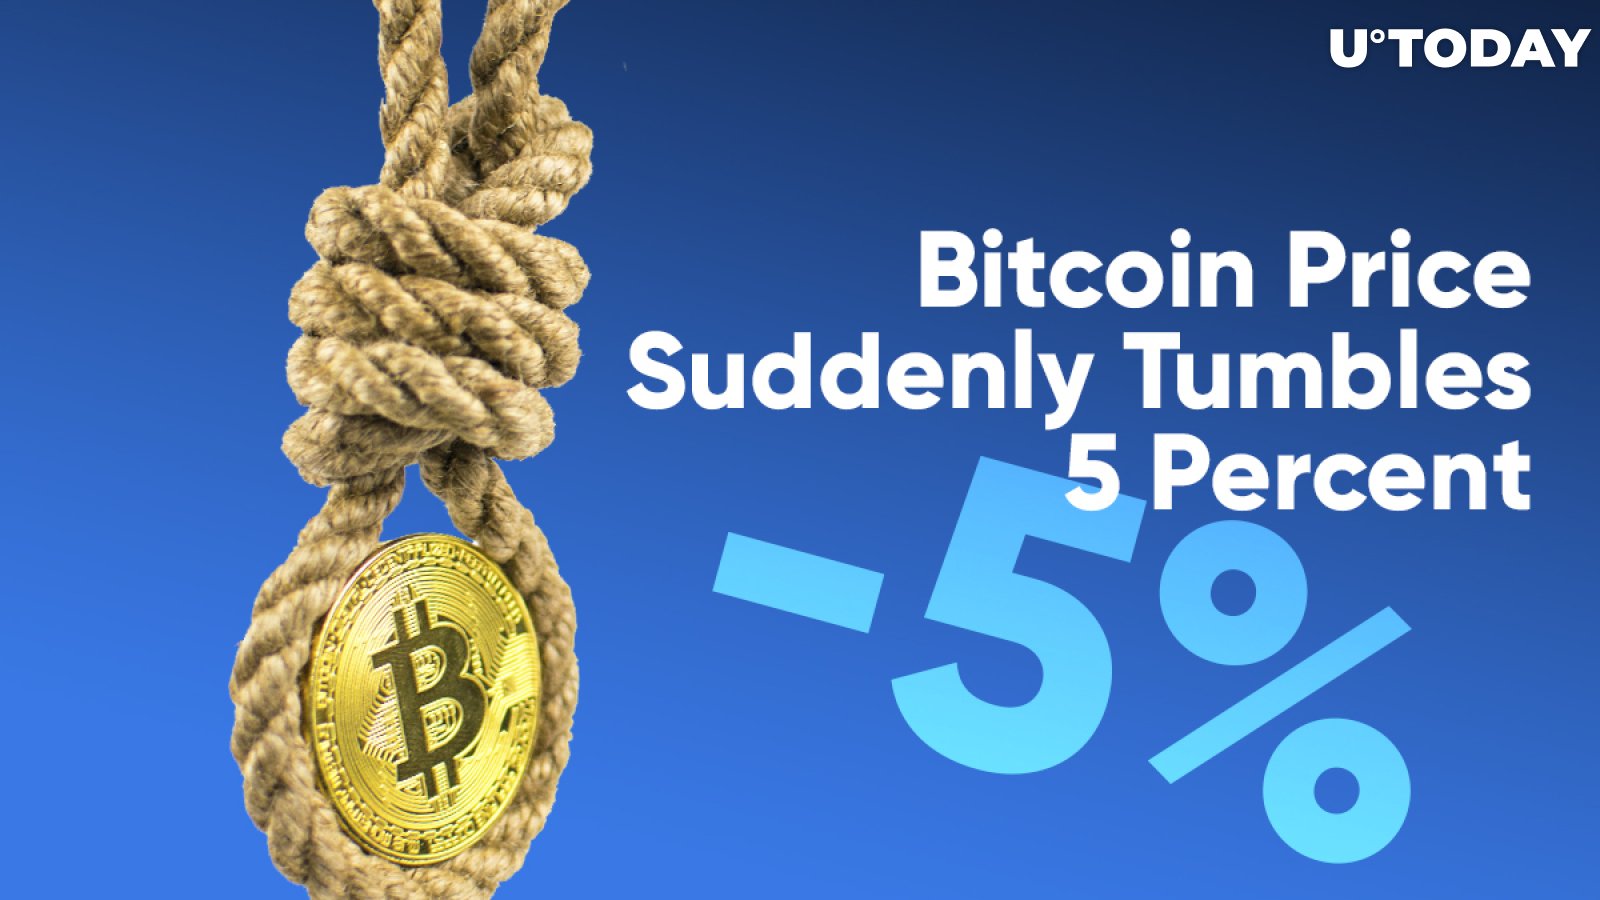 Bitcoin Price Suddenly Tumbles 5 Percent as Hash Rate Reaches New Highs